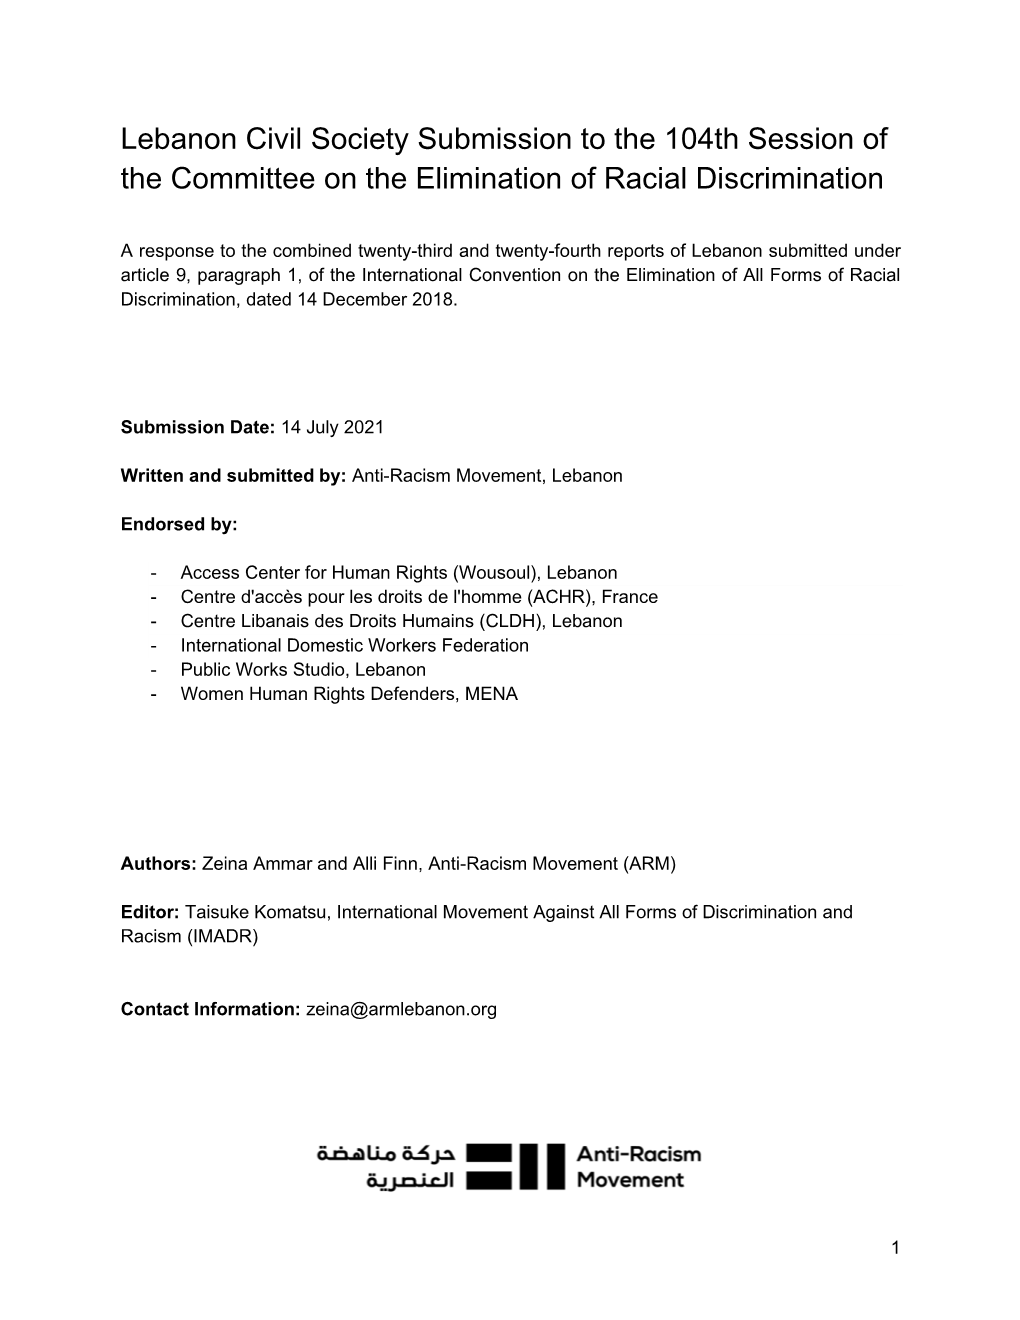 Lebanon Civil Society Submission to the 104Th Session of the Committee on the Elimination of Racial Discrimination